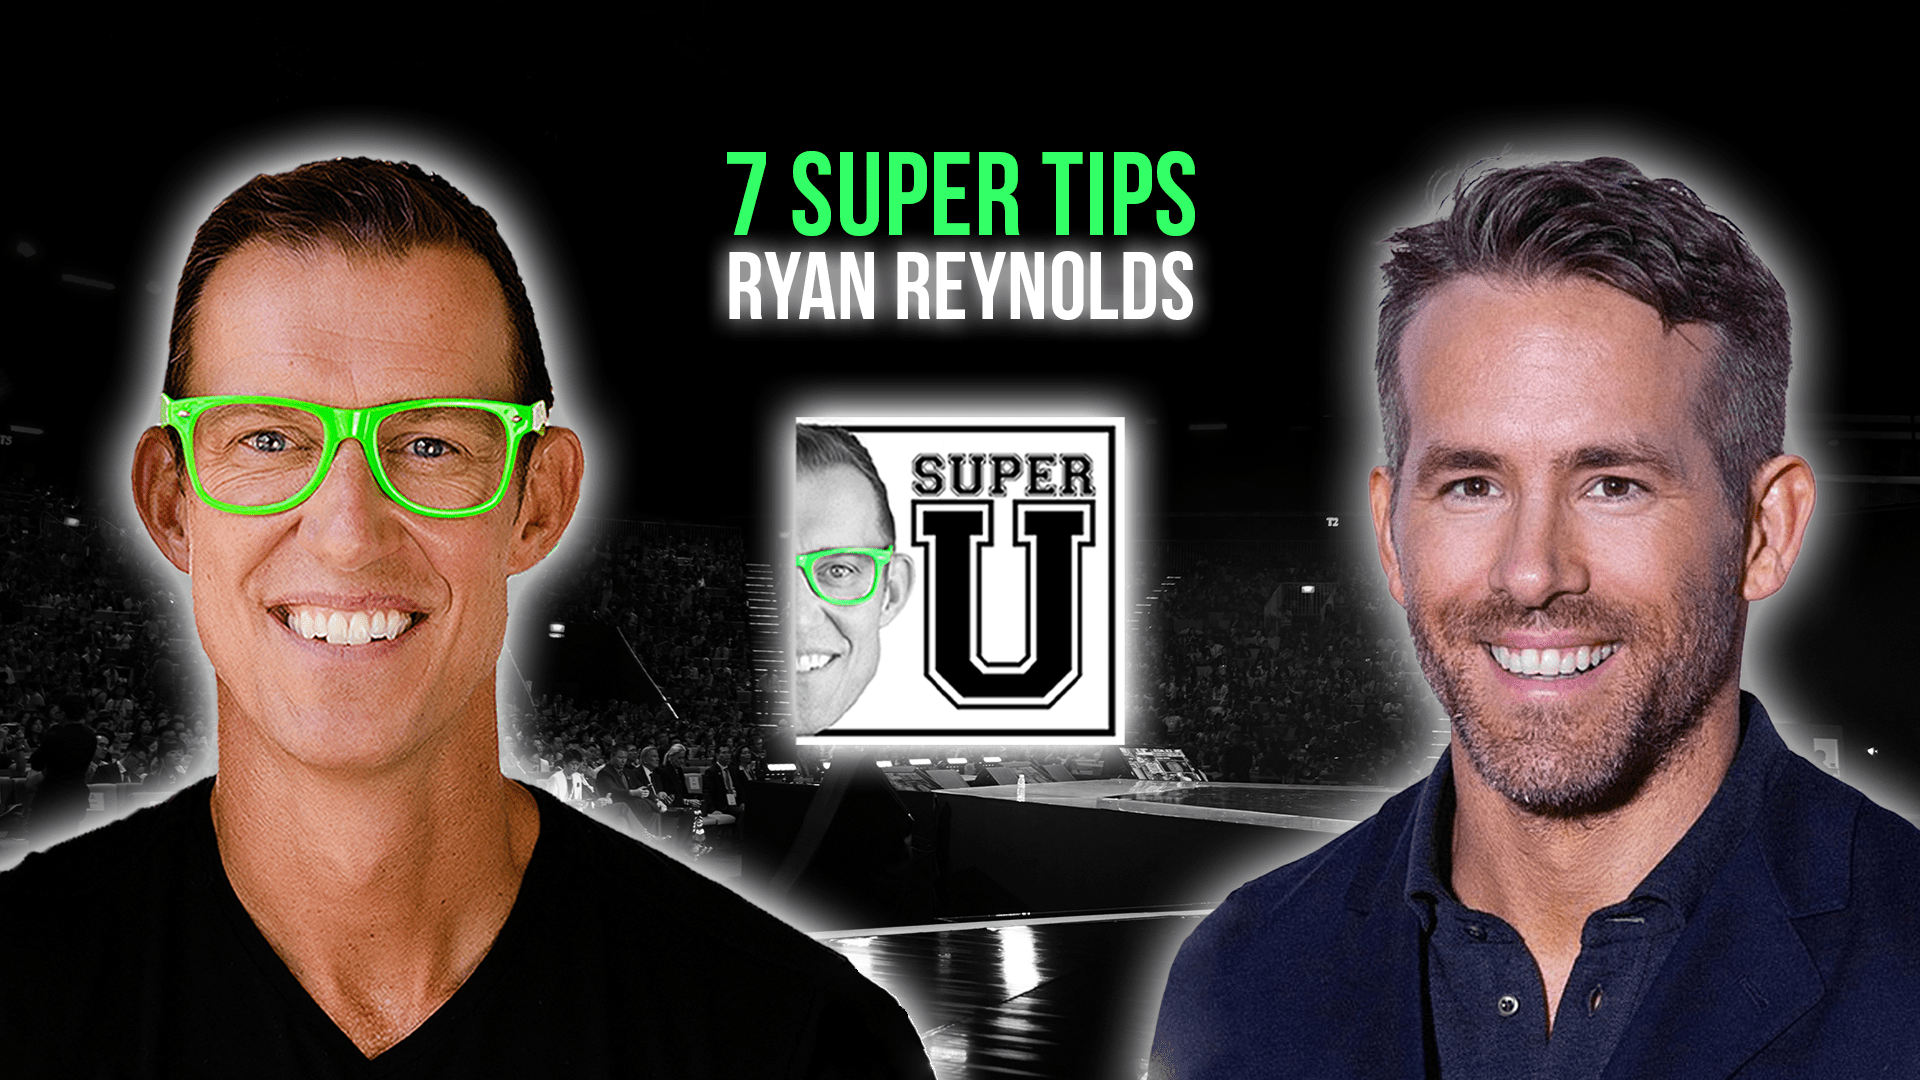 super-u-podcast-passion-and-success-with-ryan-reynolds